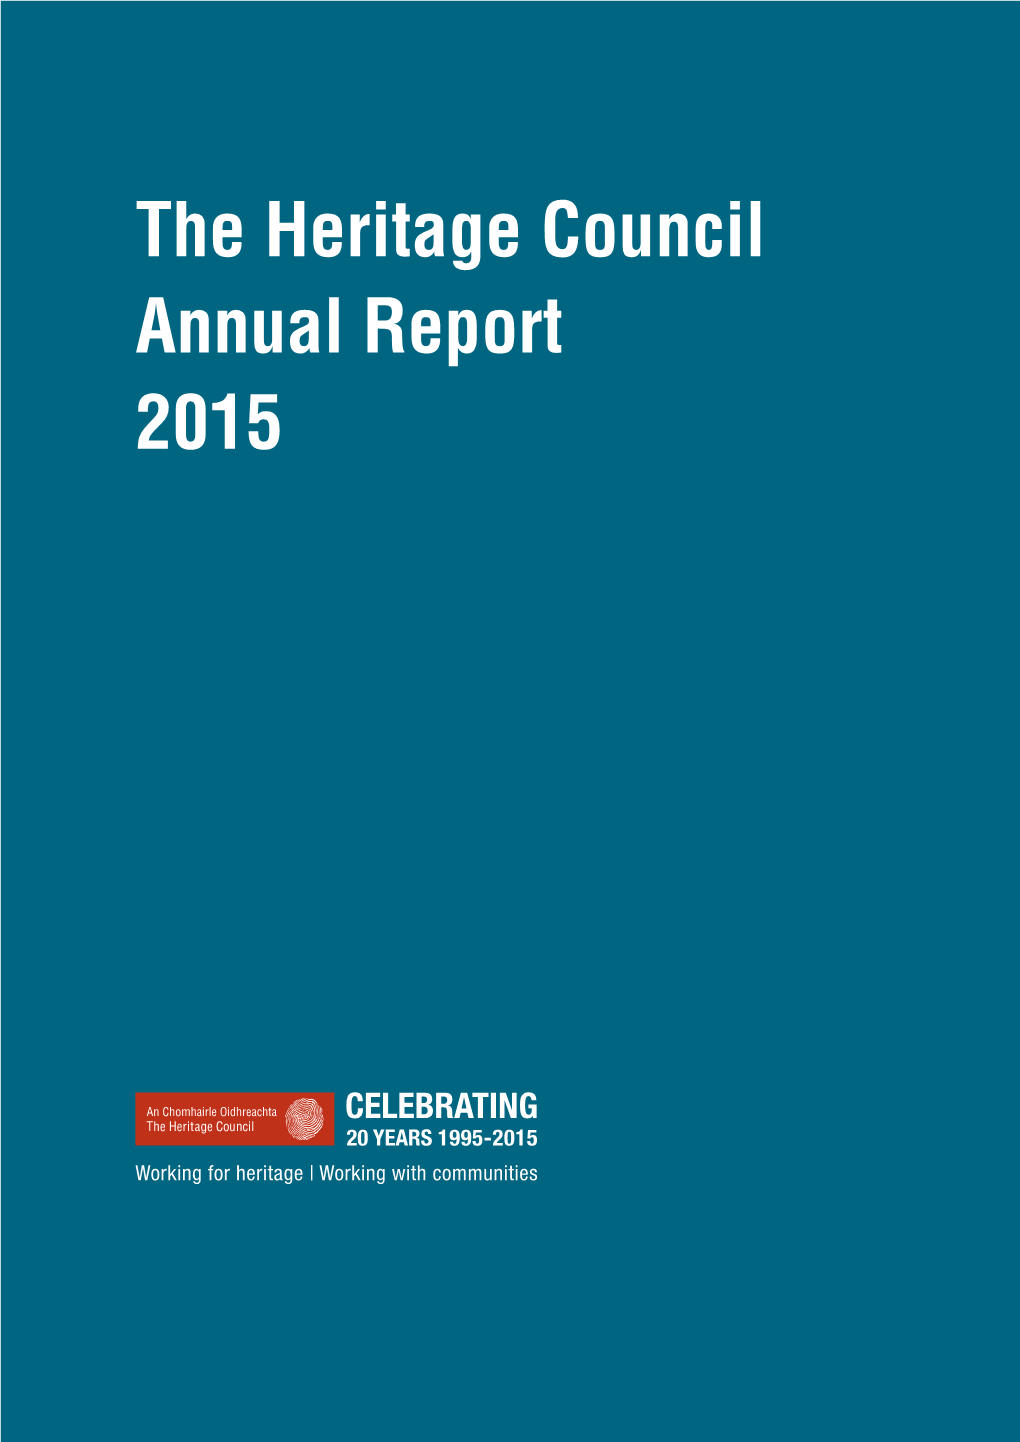 The Heritage Council Annual Report 2015